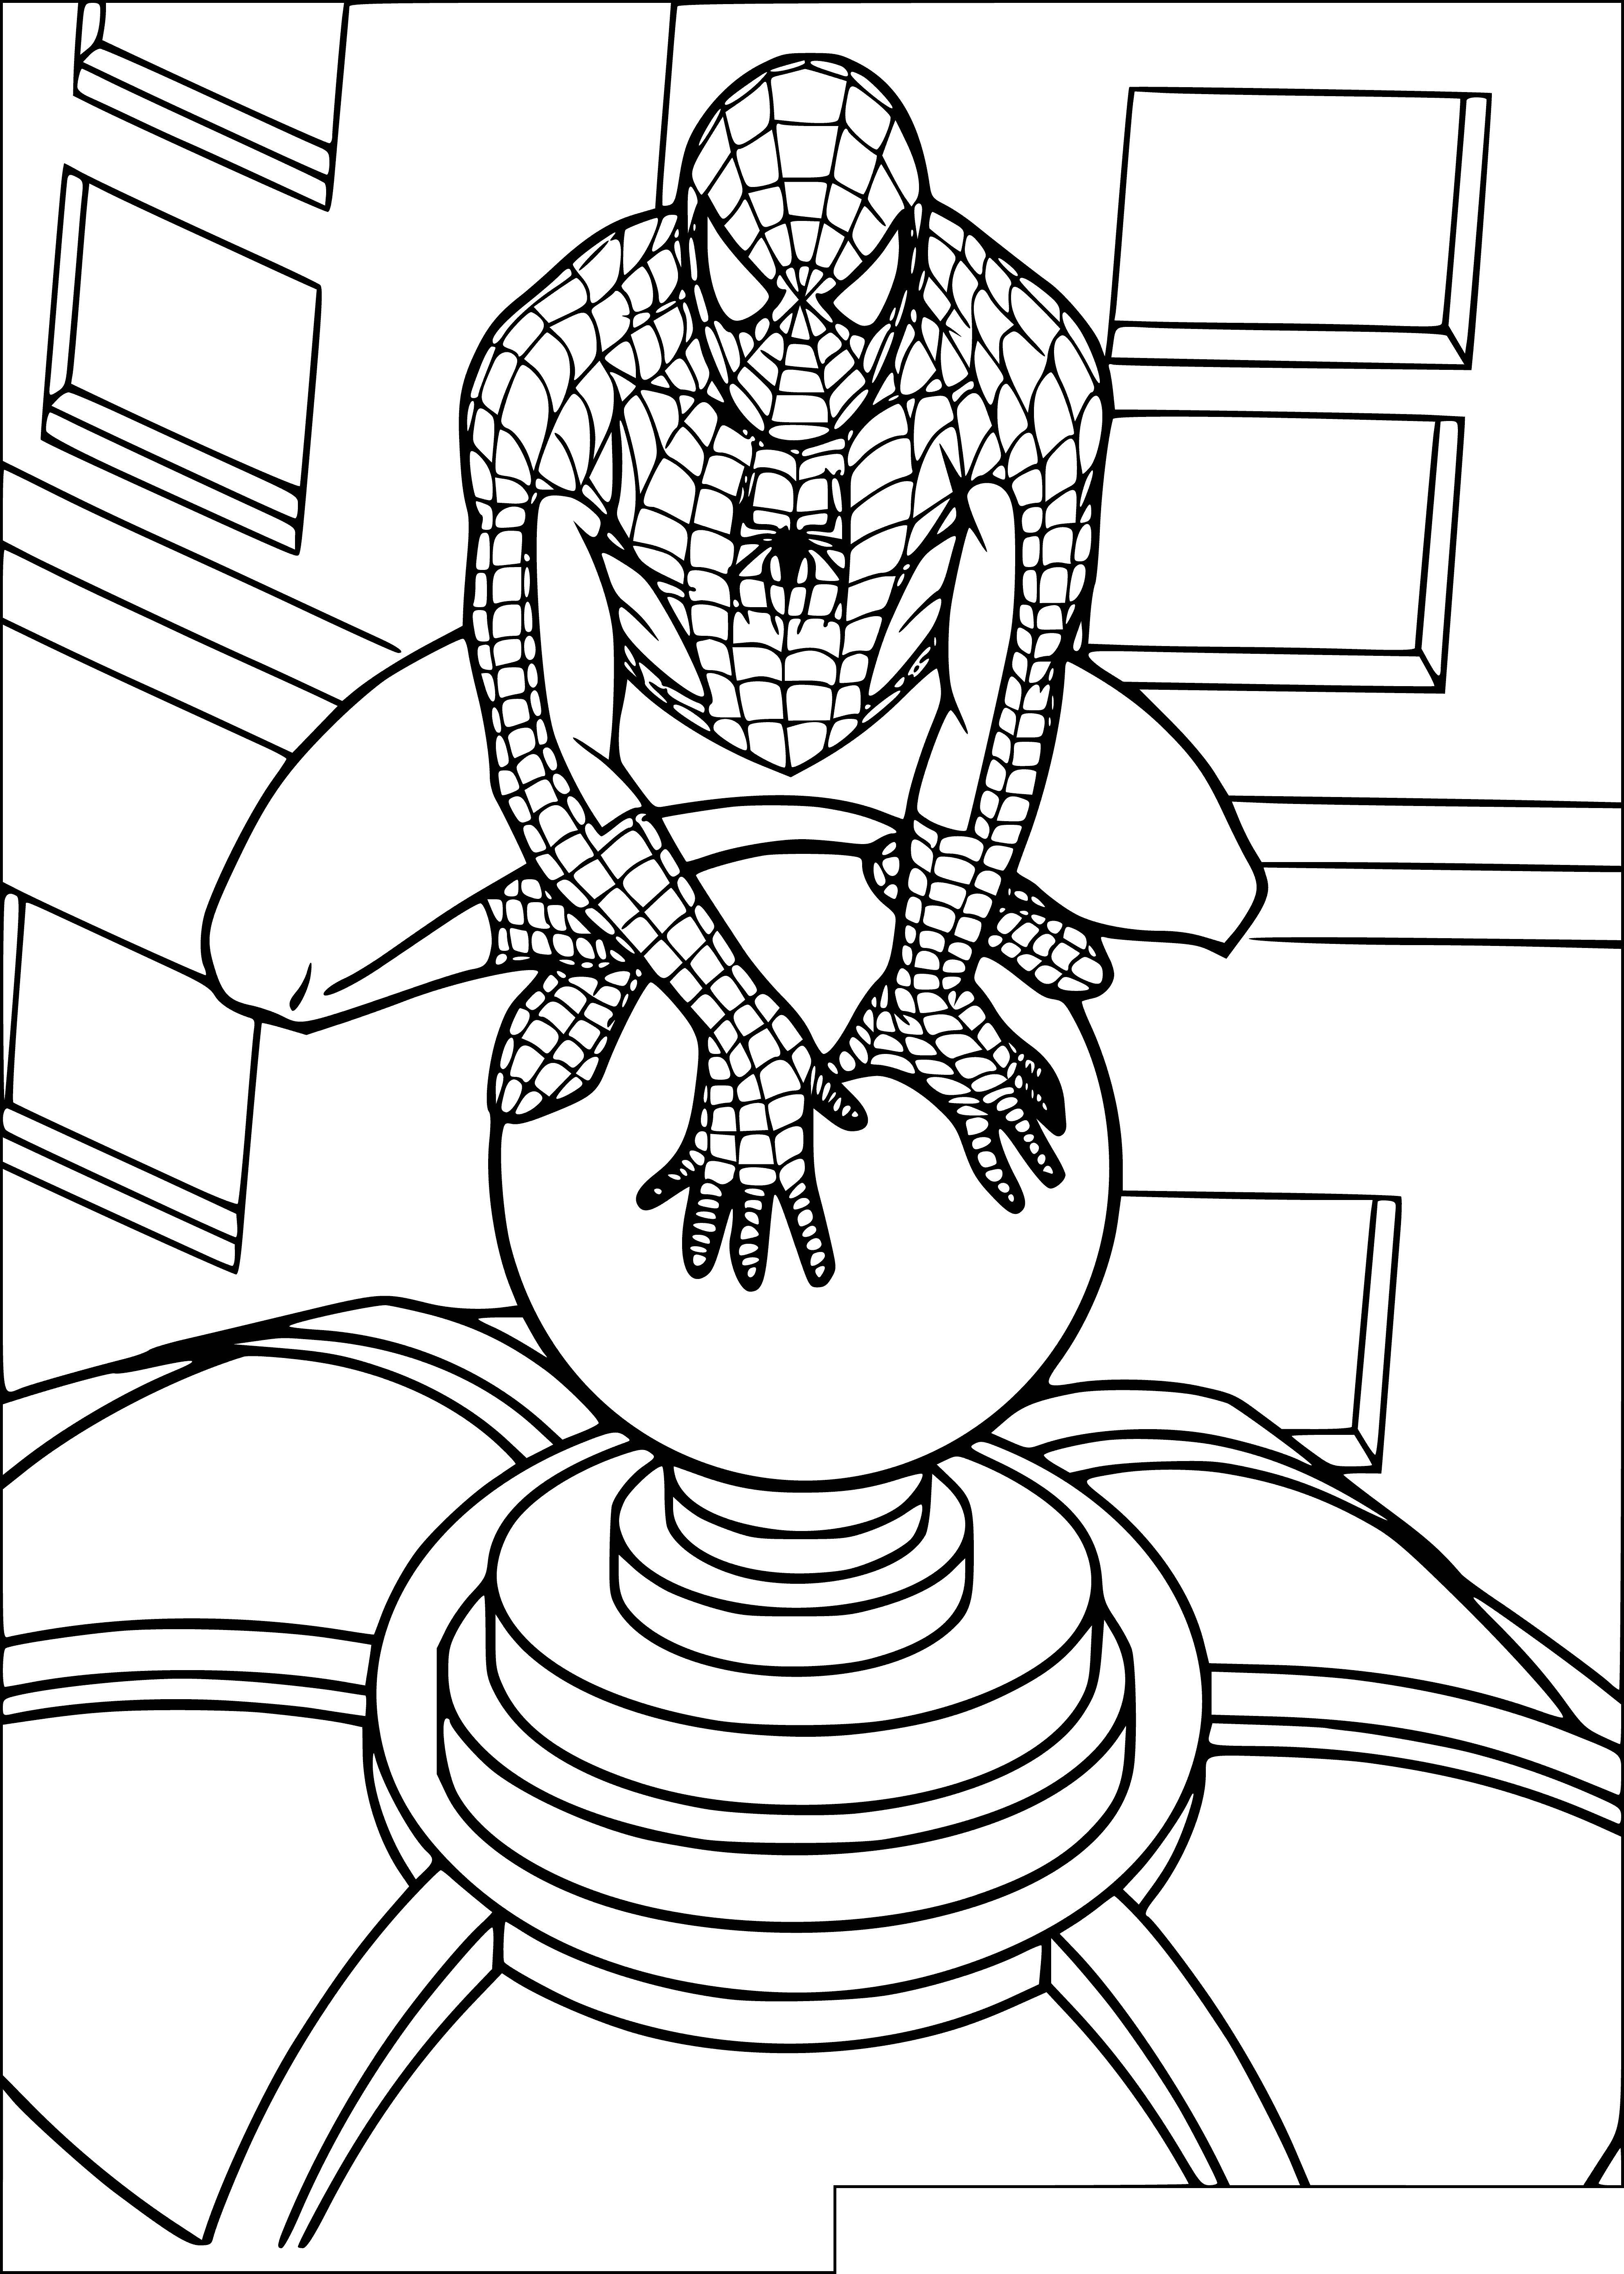 coloring page: Spider-Man is ready to fight while standing atop a building in his iconic red and blue suit with spider emblem. Mask covering his face. #HeroVigilante